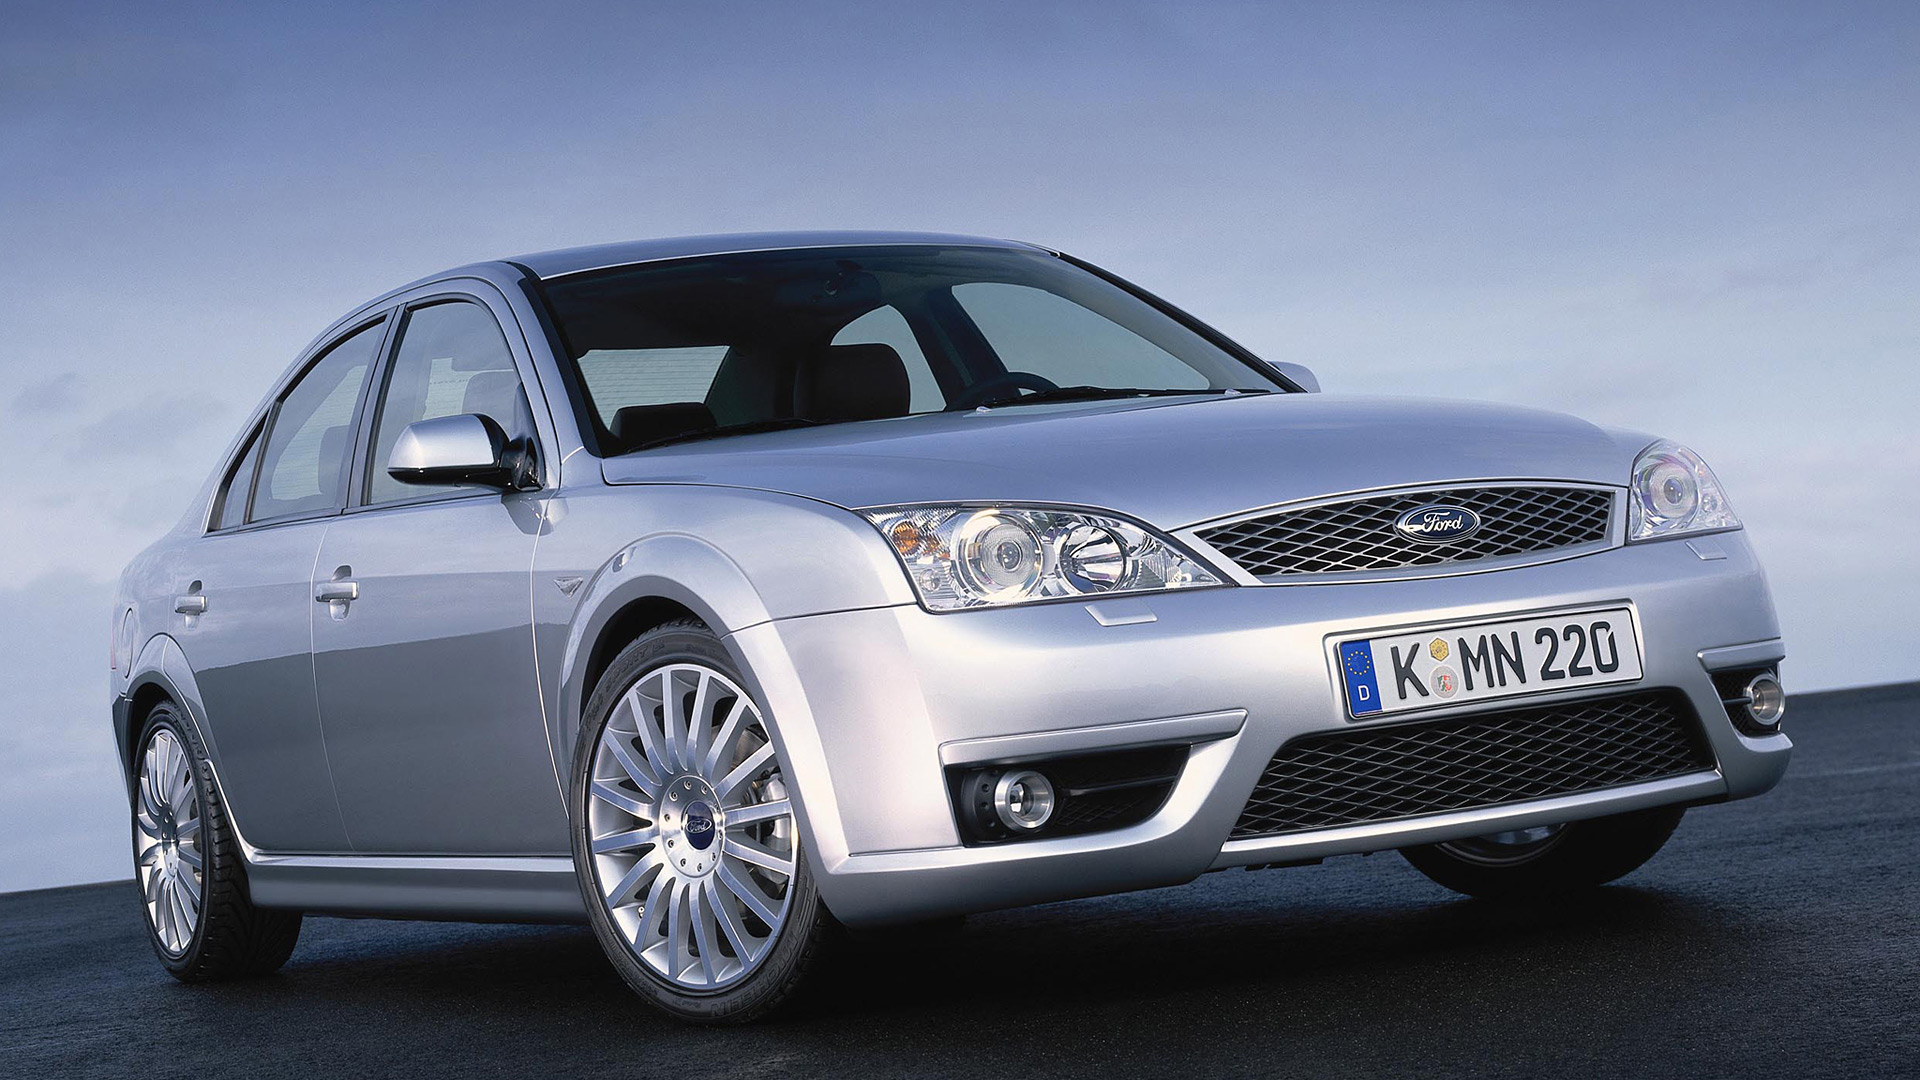  2002 Ford Mondeo ST220 Wallpaper.